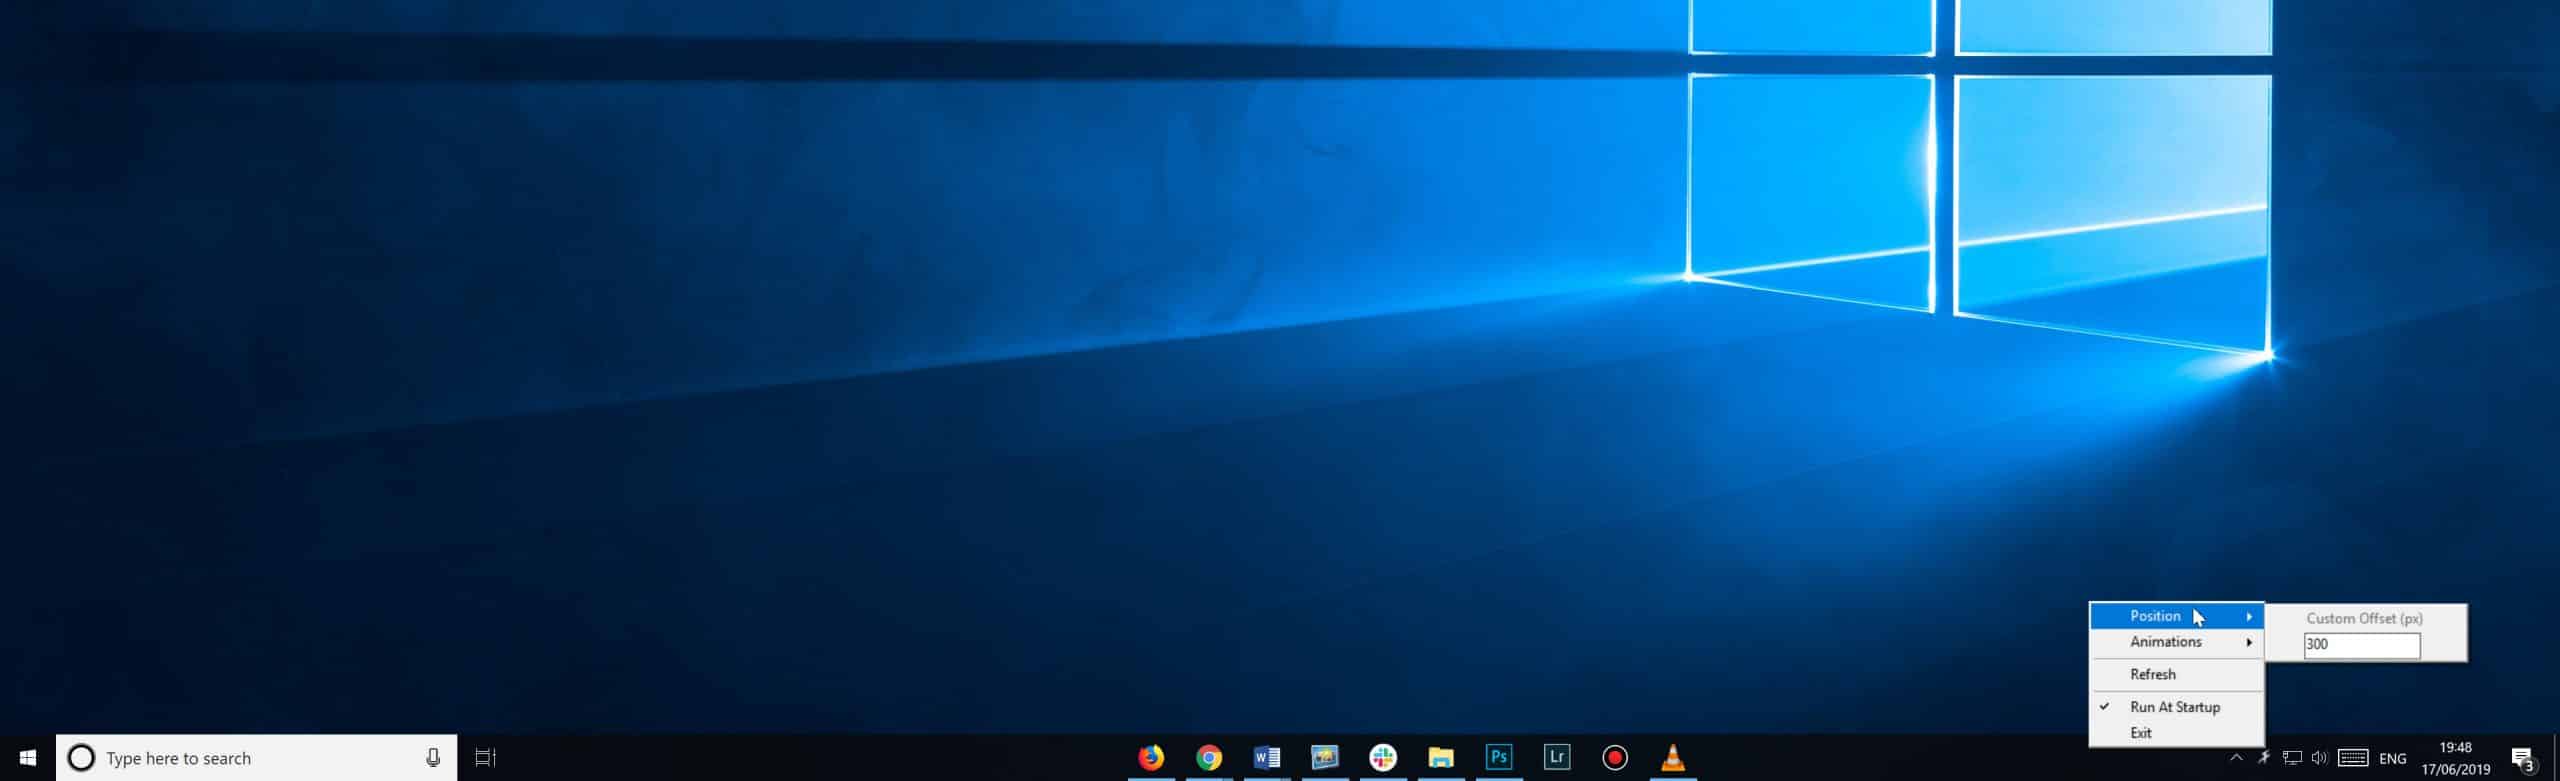 how to change icon picture on windows 10